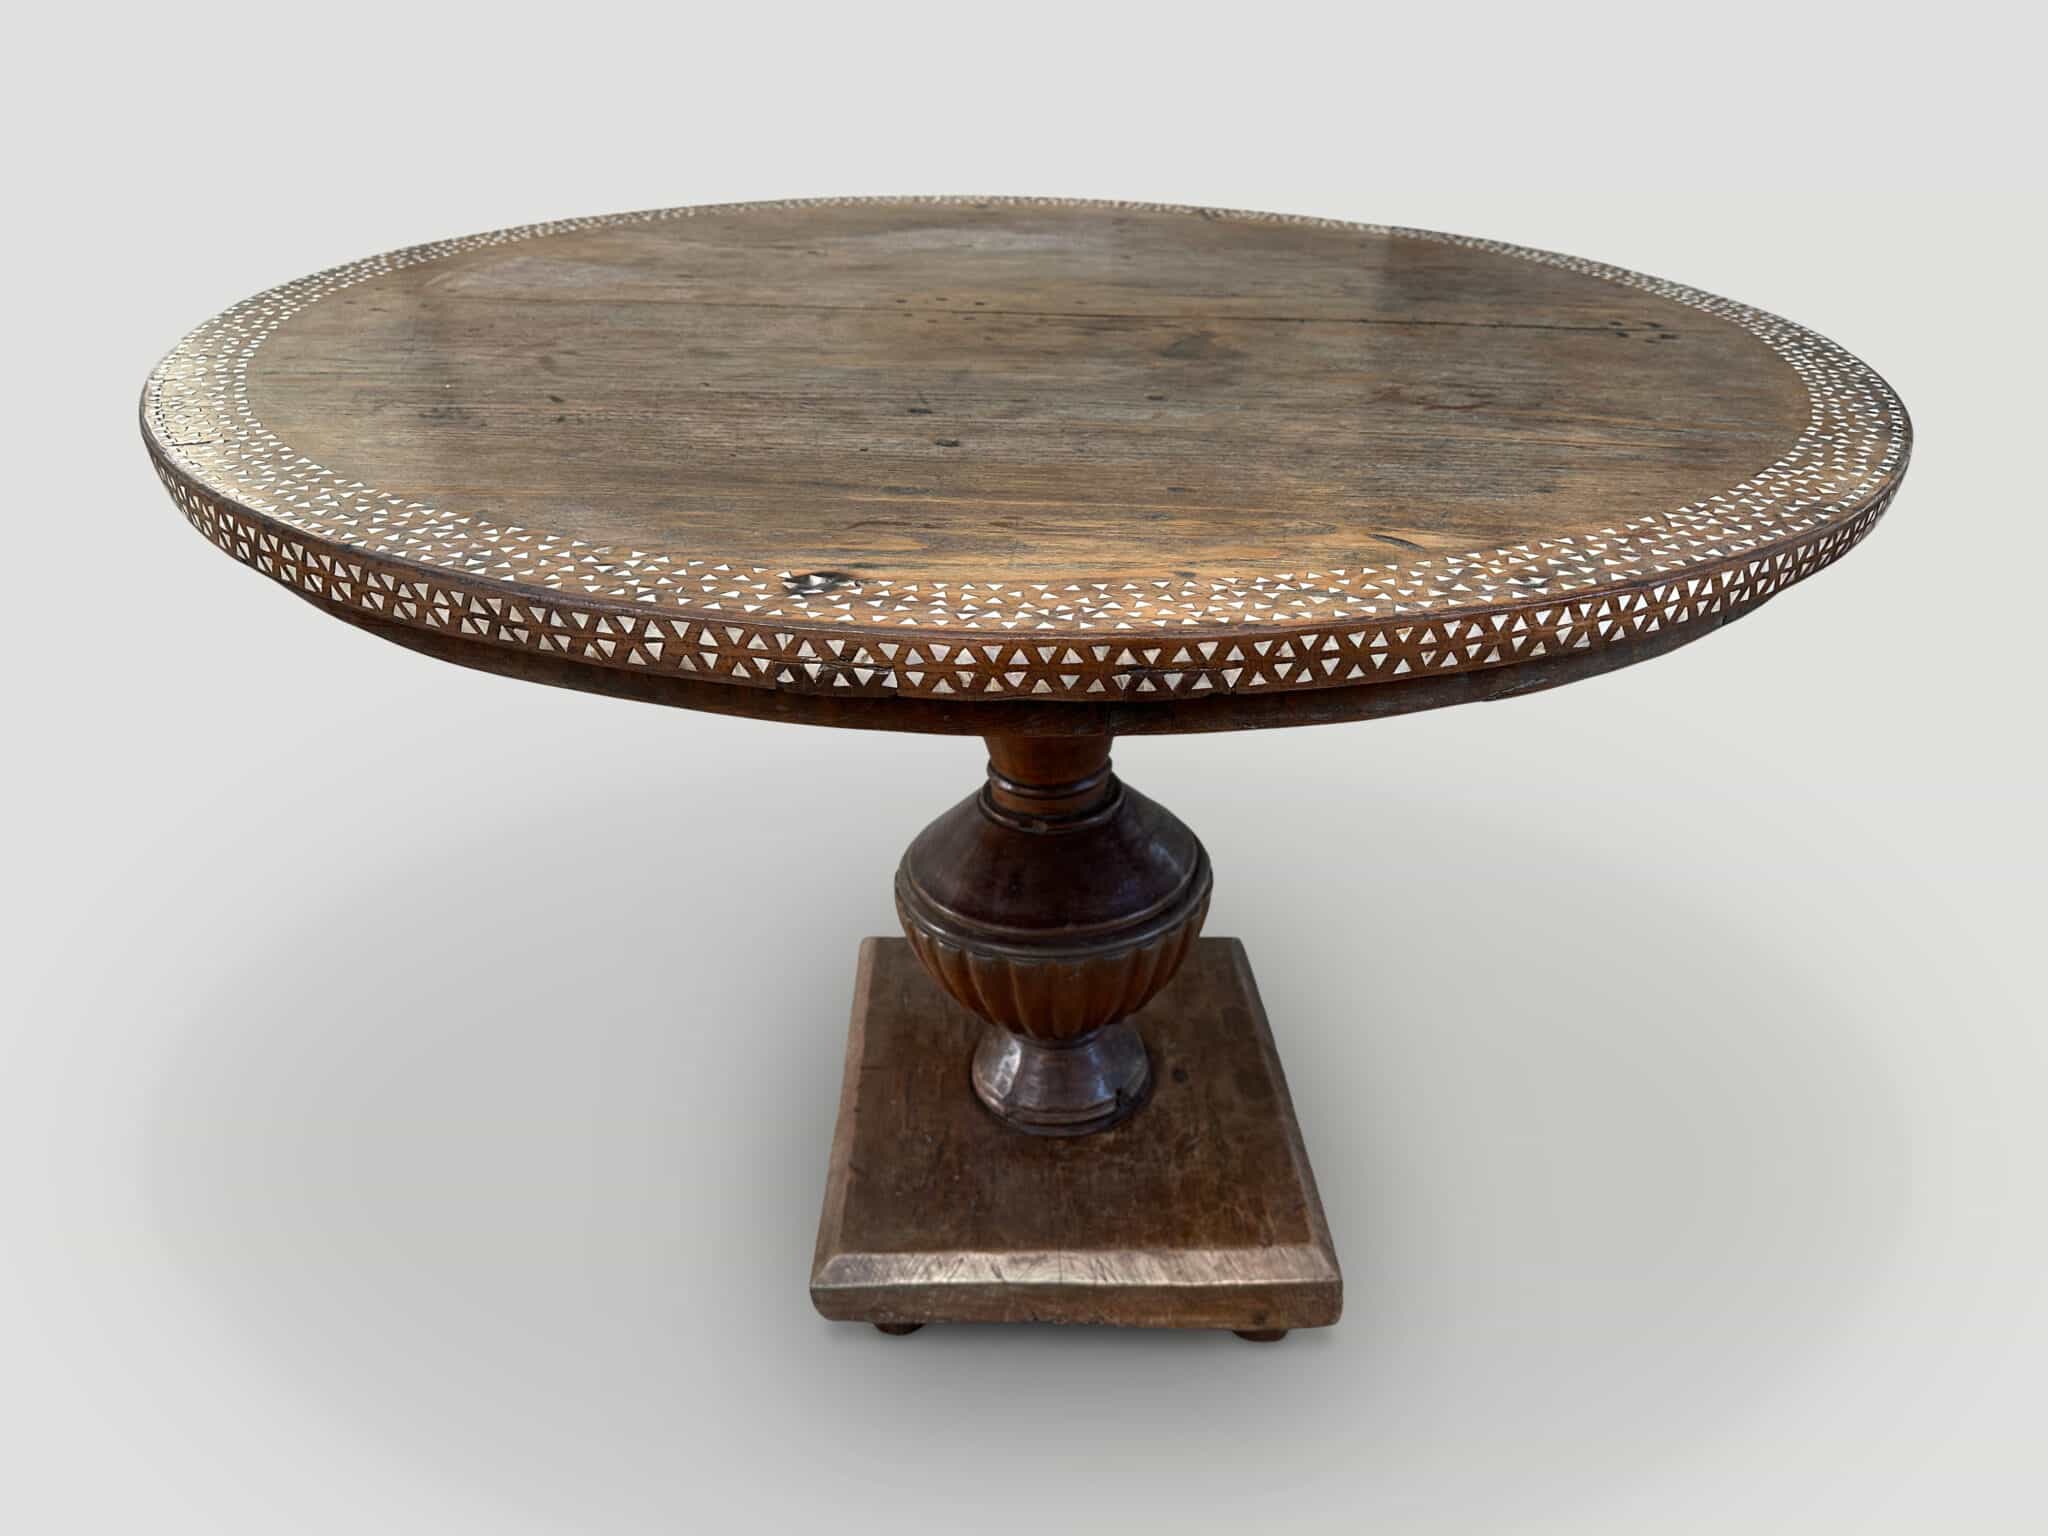 Colonial teak wood round dining table or entry table